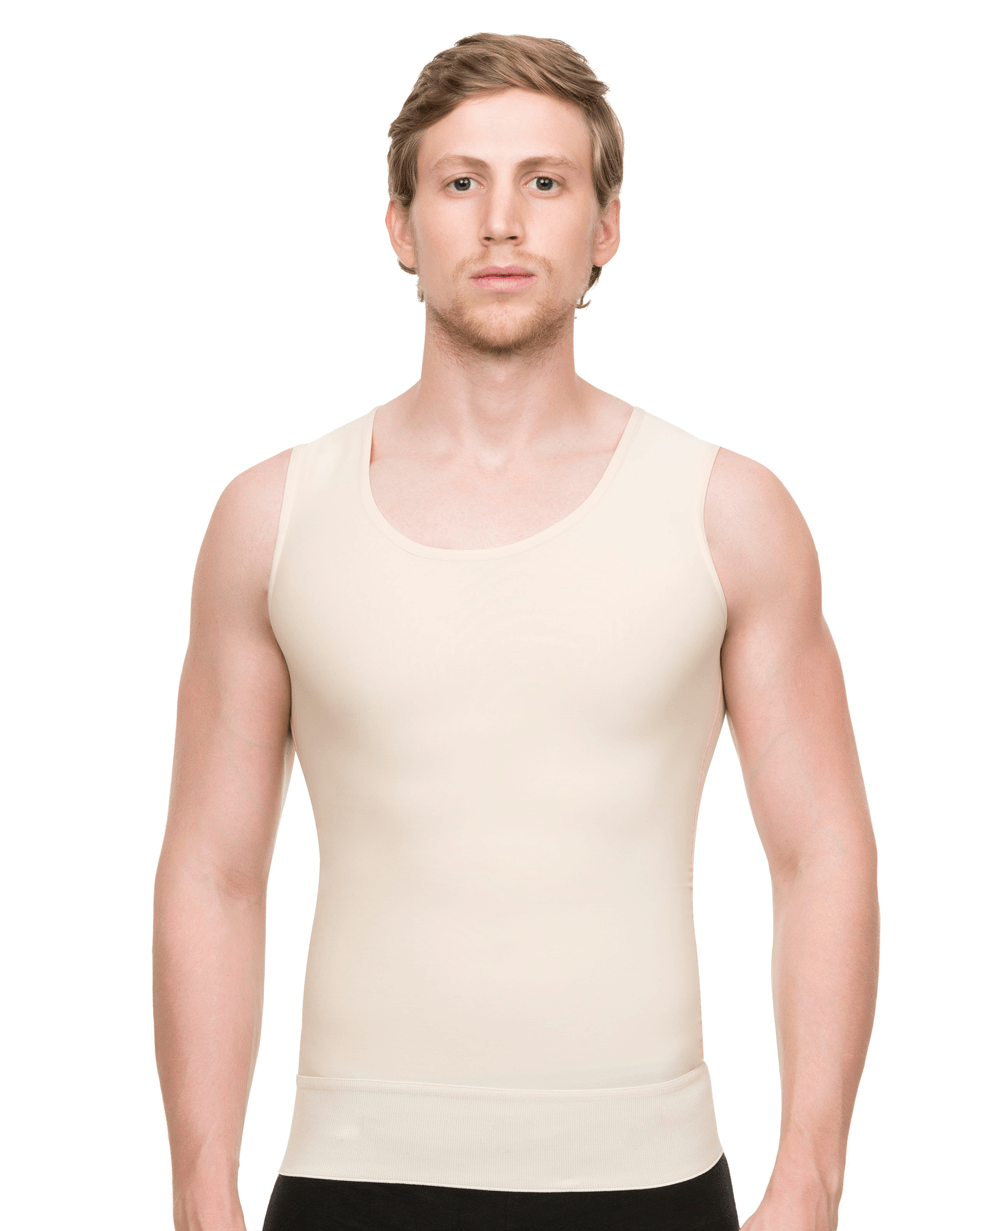 2nd Stage Male Abdominal Cosmetic Surgery Compression Vest with 3" Elastic Waist Band (MG05)